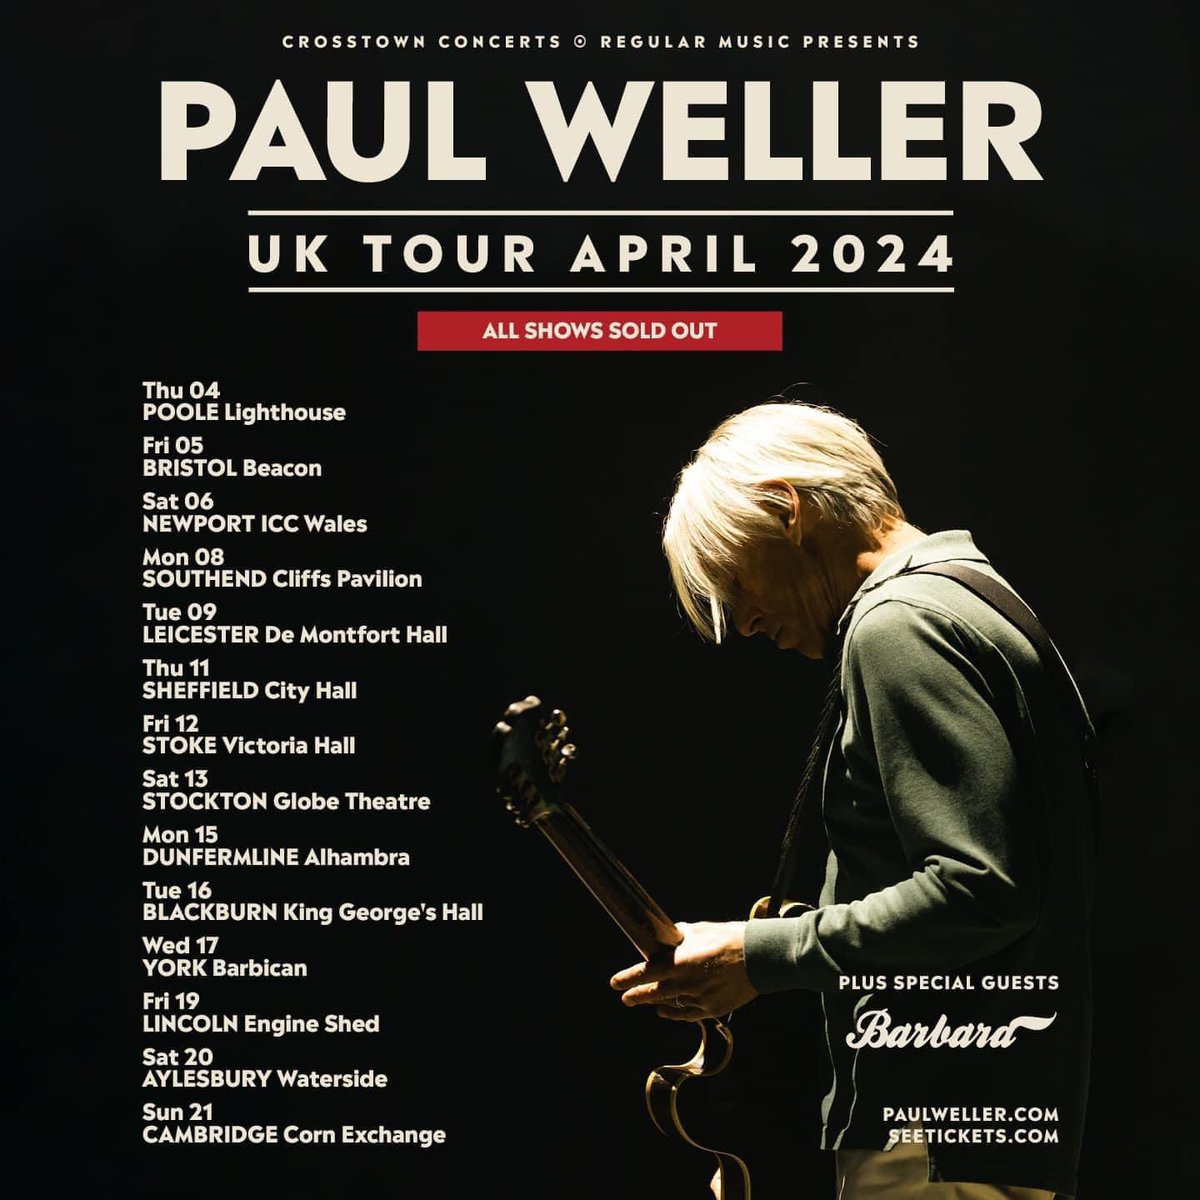 So who’s at Paul Weller tomorrow evening? @KingGeorgesHall @paulwellerHQ